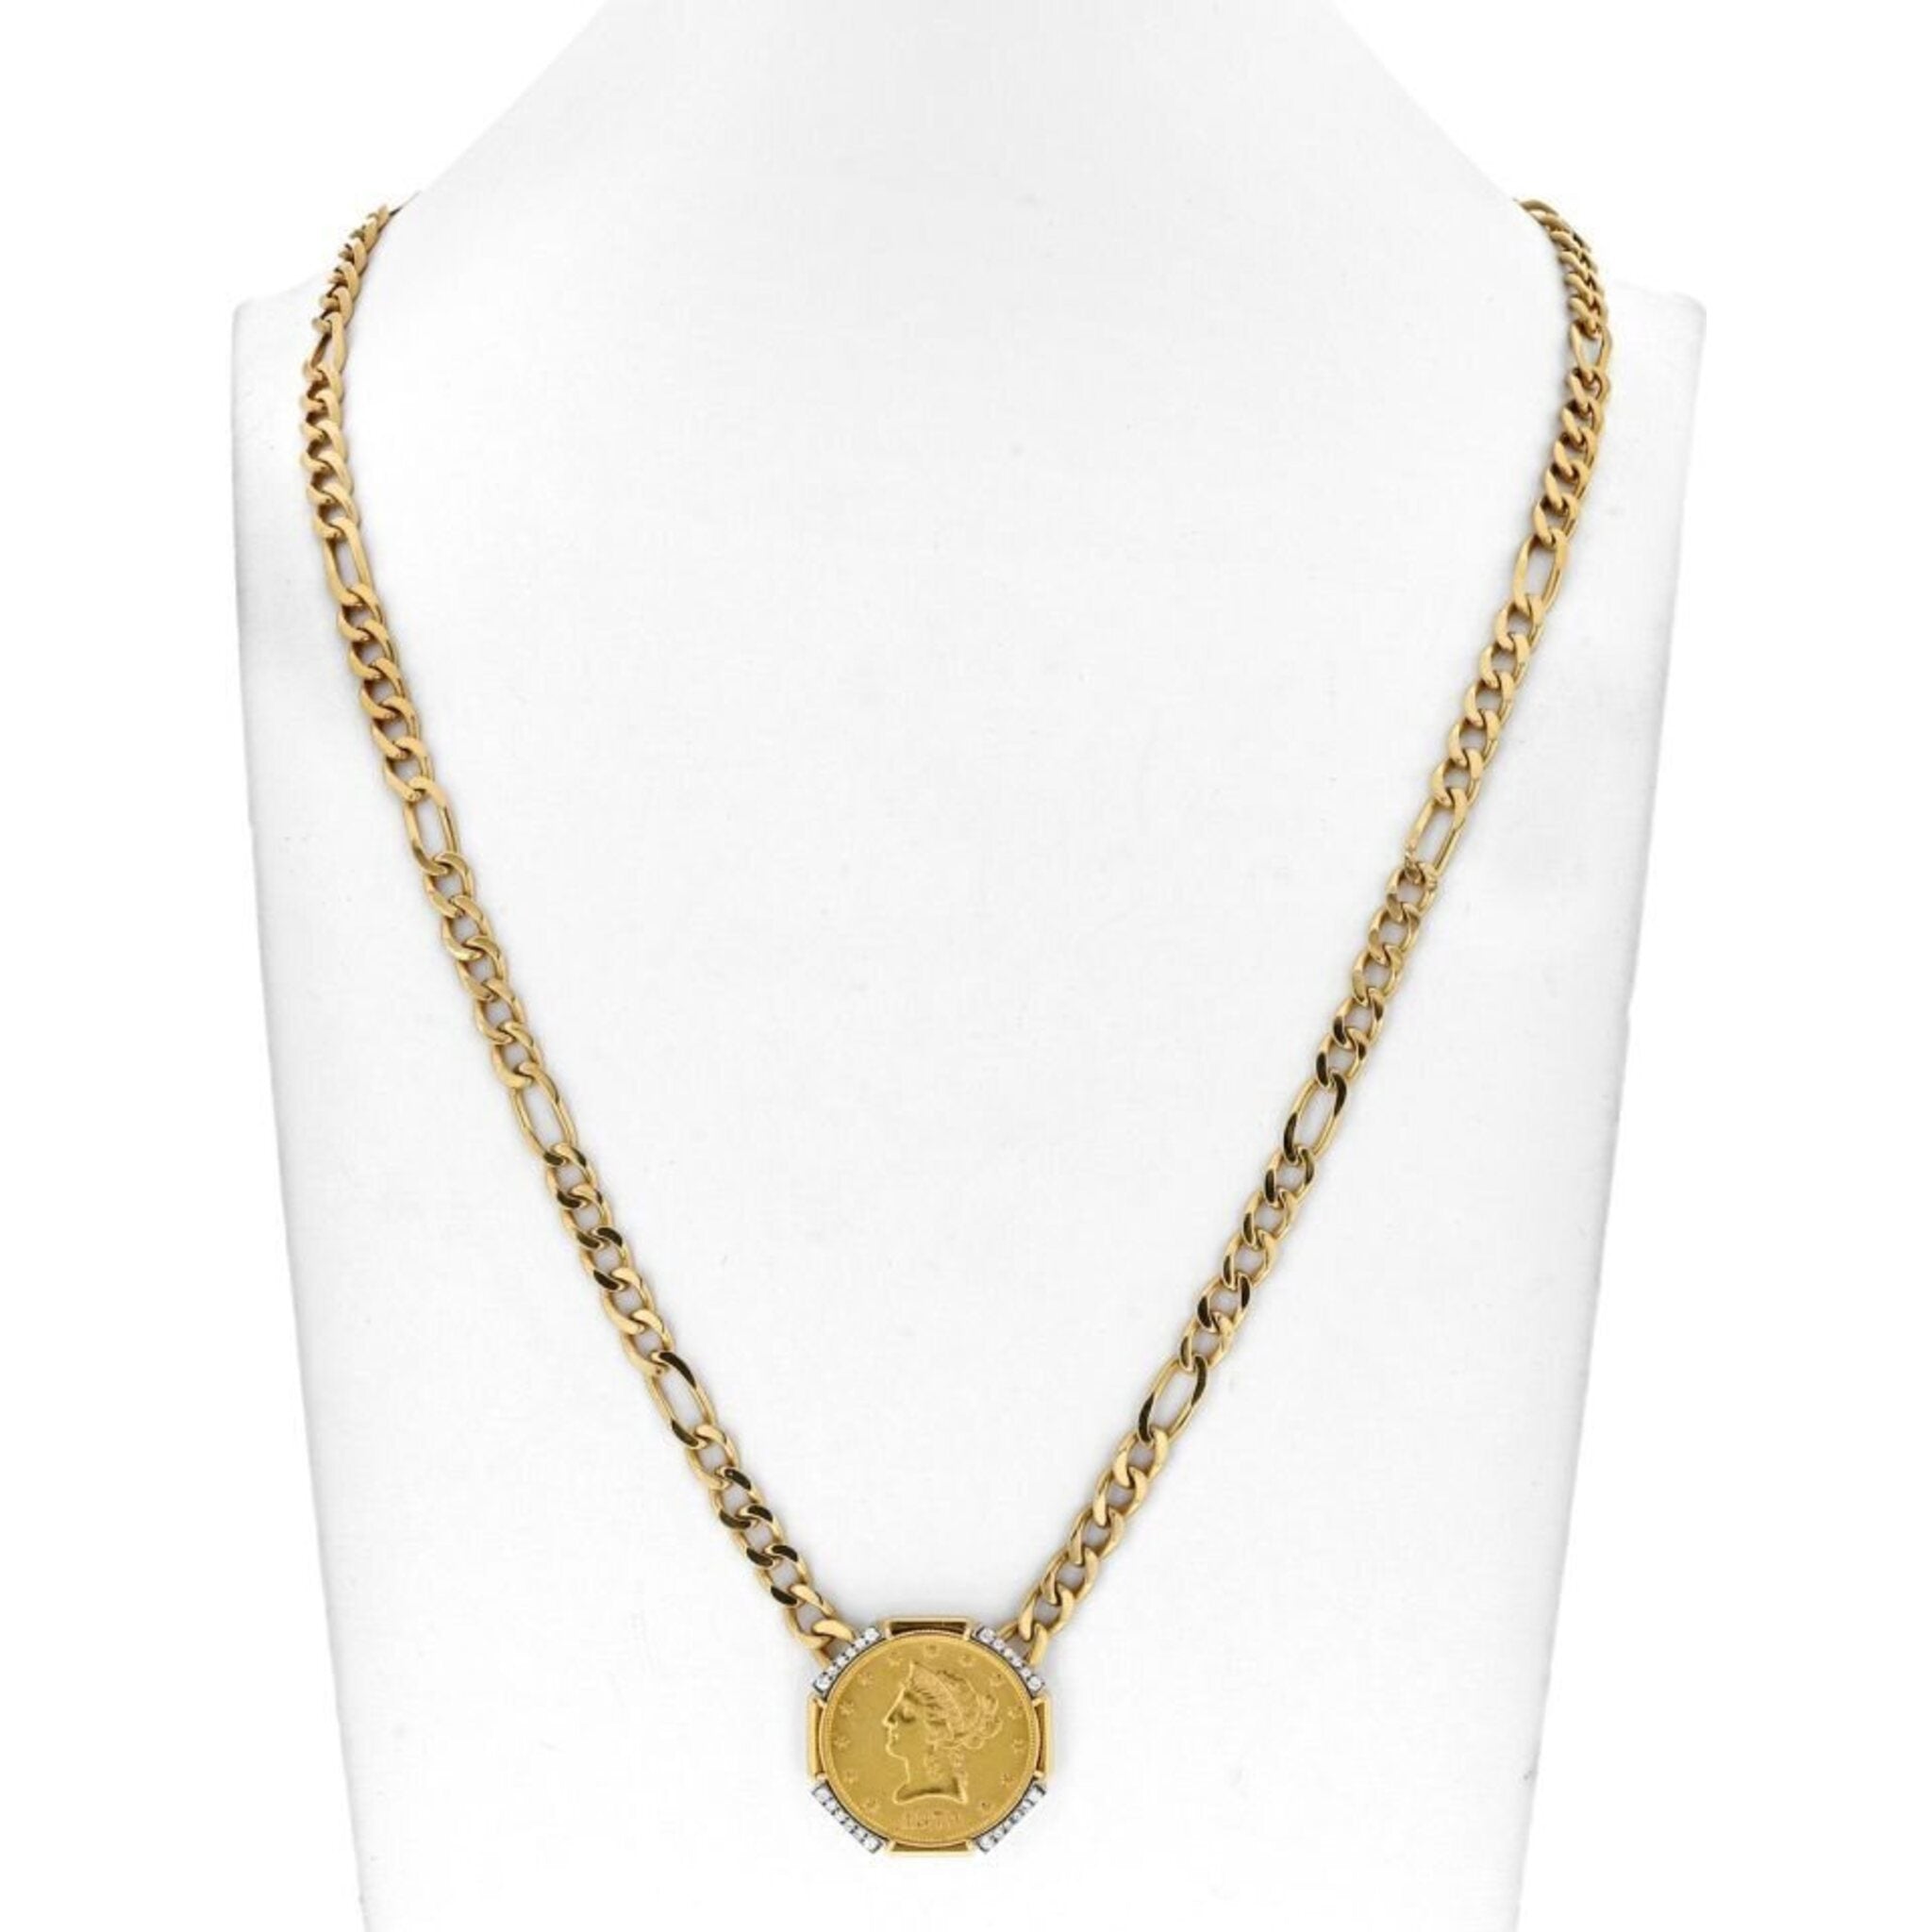 Lot - U.S. $20 LIBERTY GOLD COIN NECKLACE